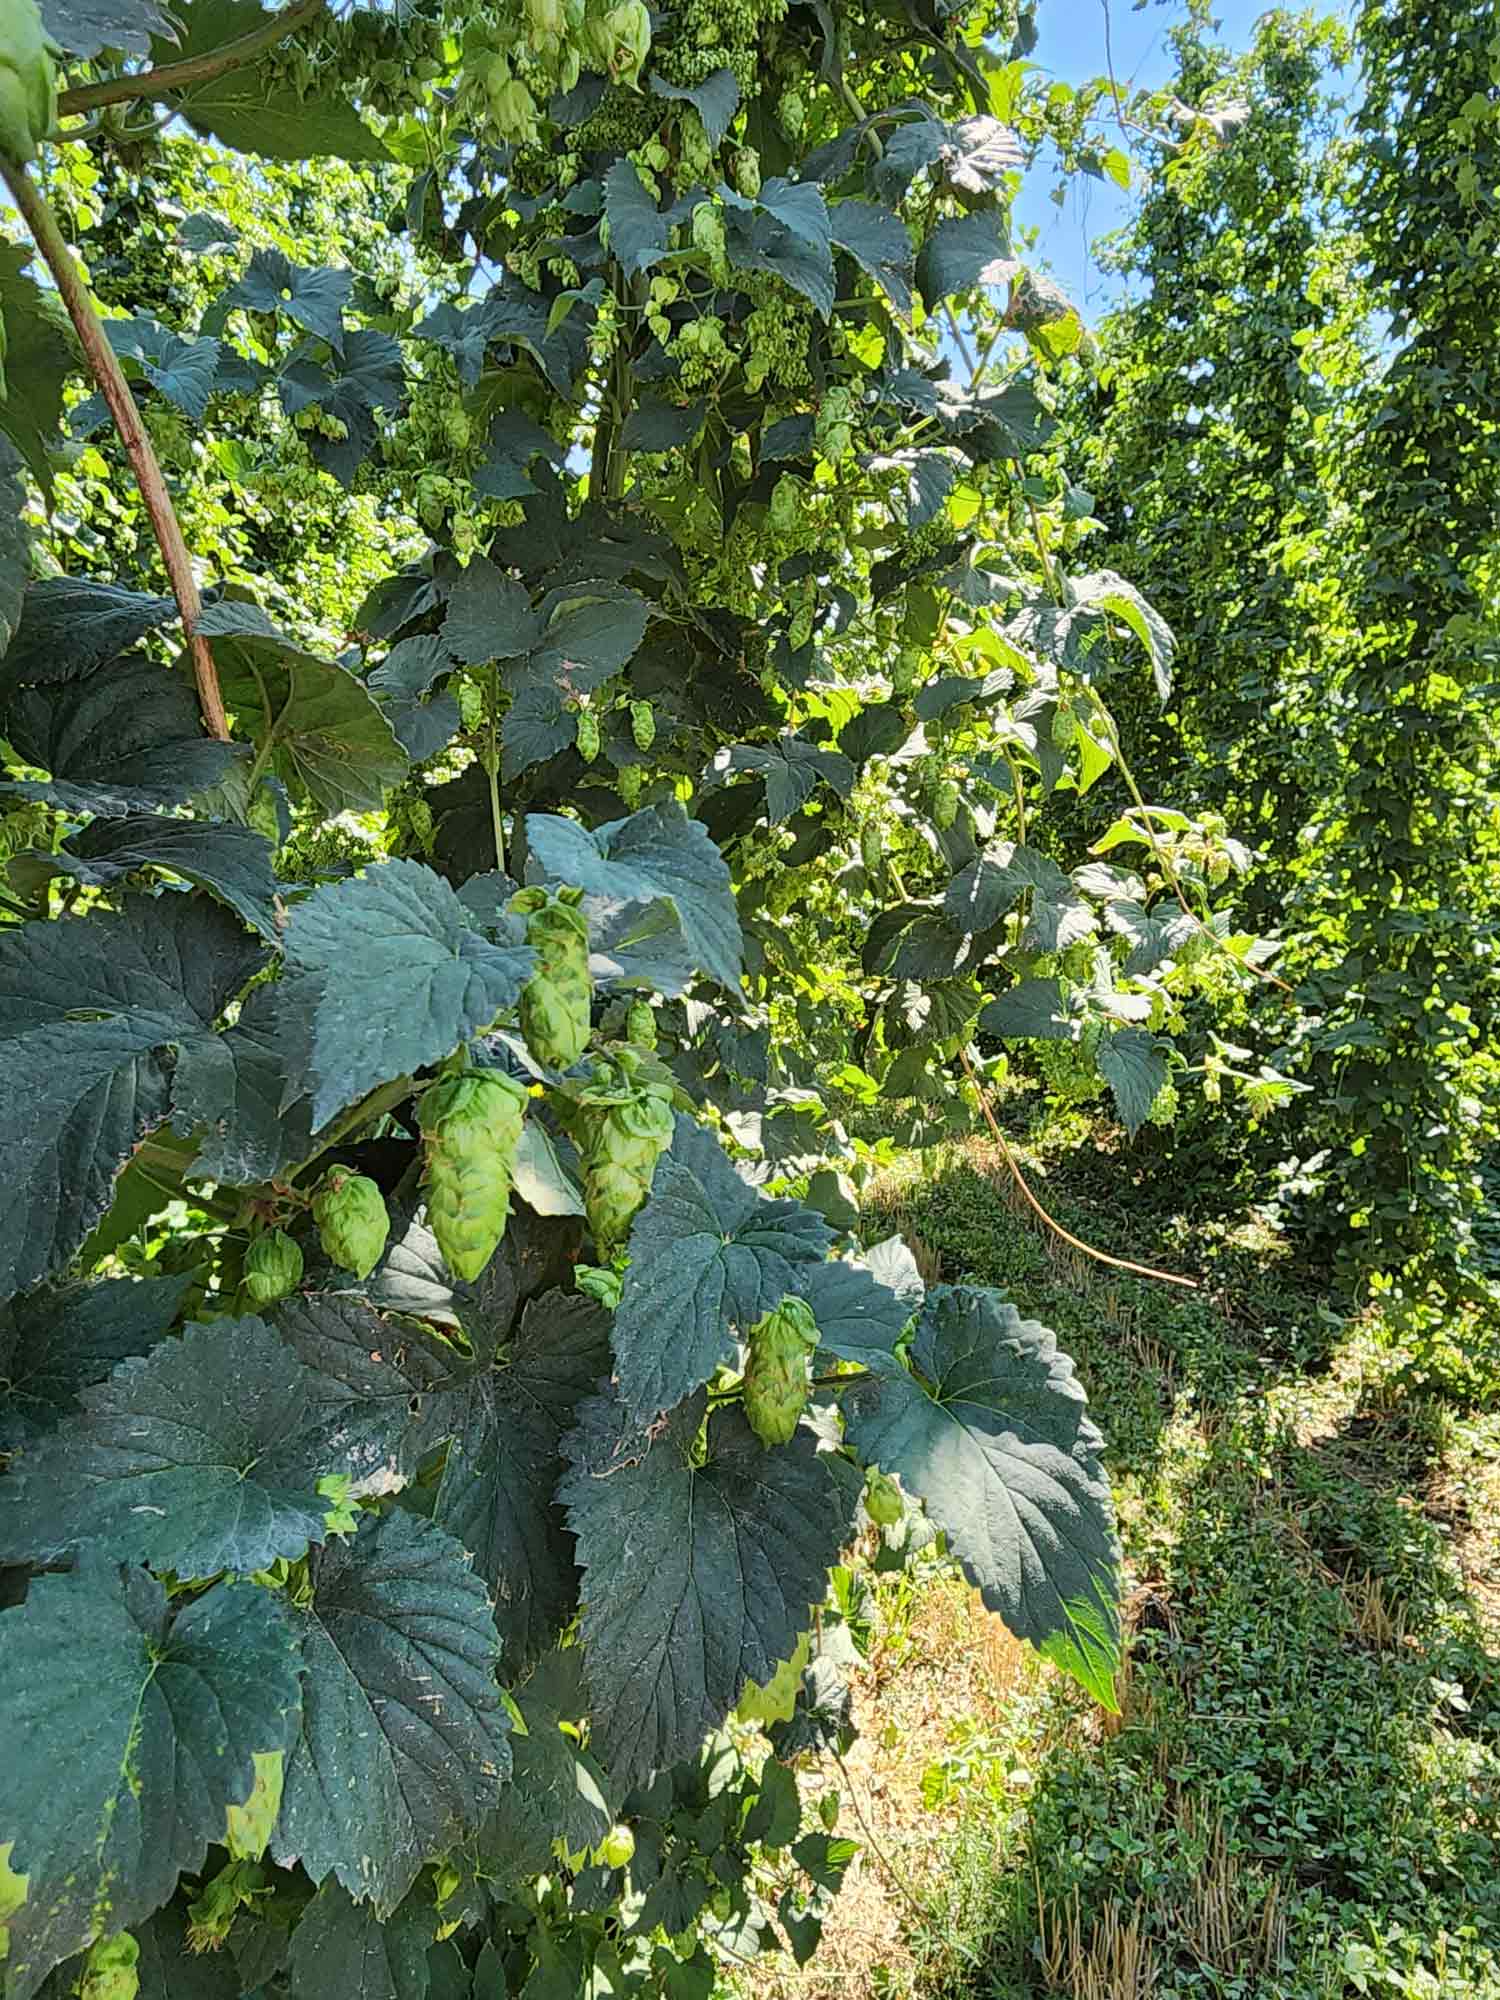 Hops on the vine in a field Loftus Ranches hops farm in Yakima Valley, Washington